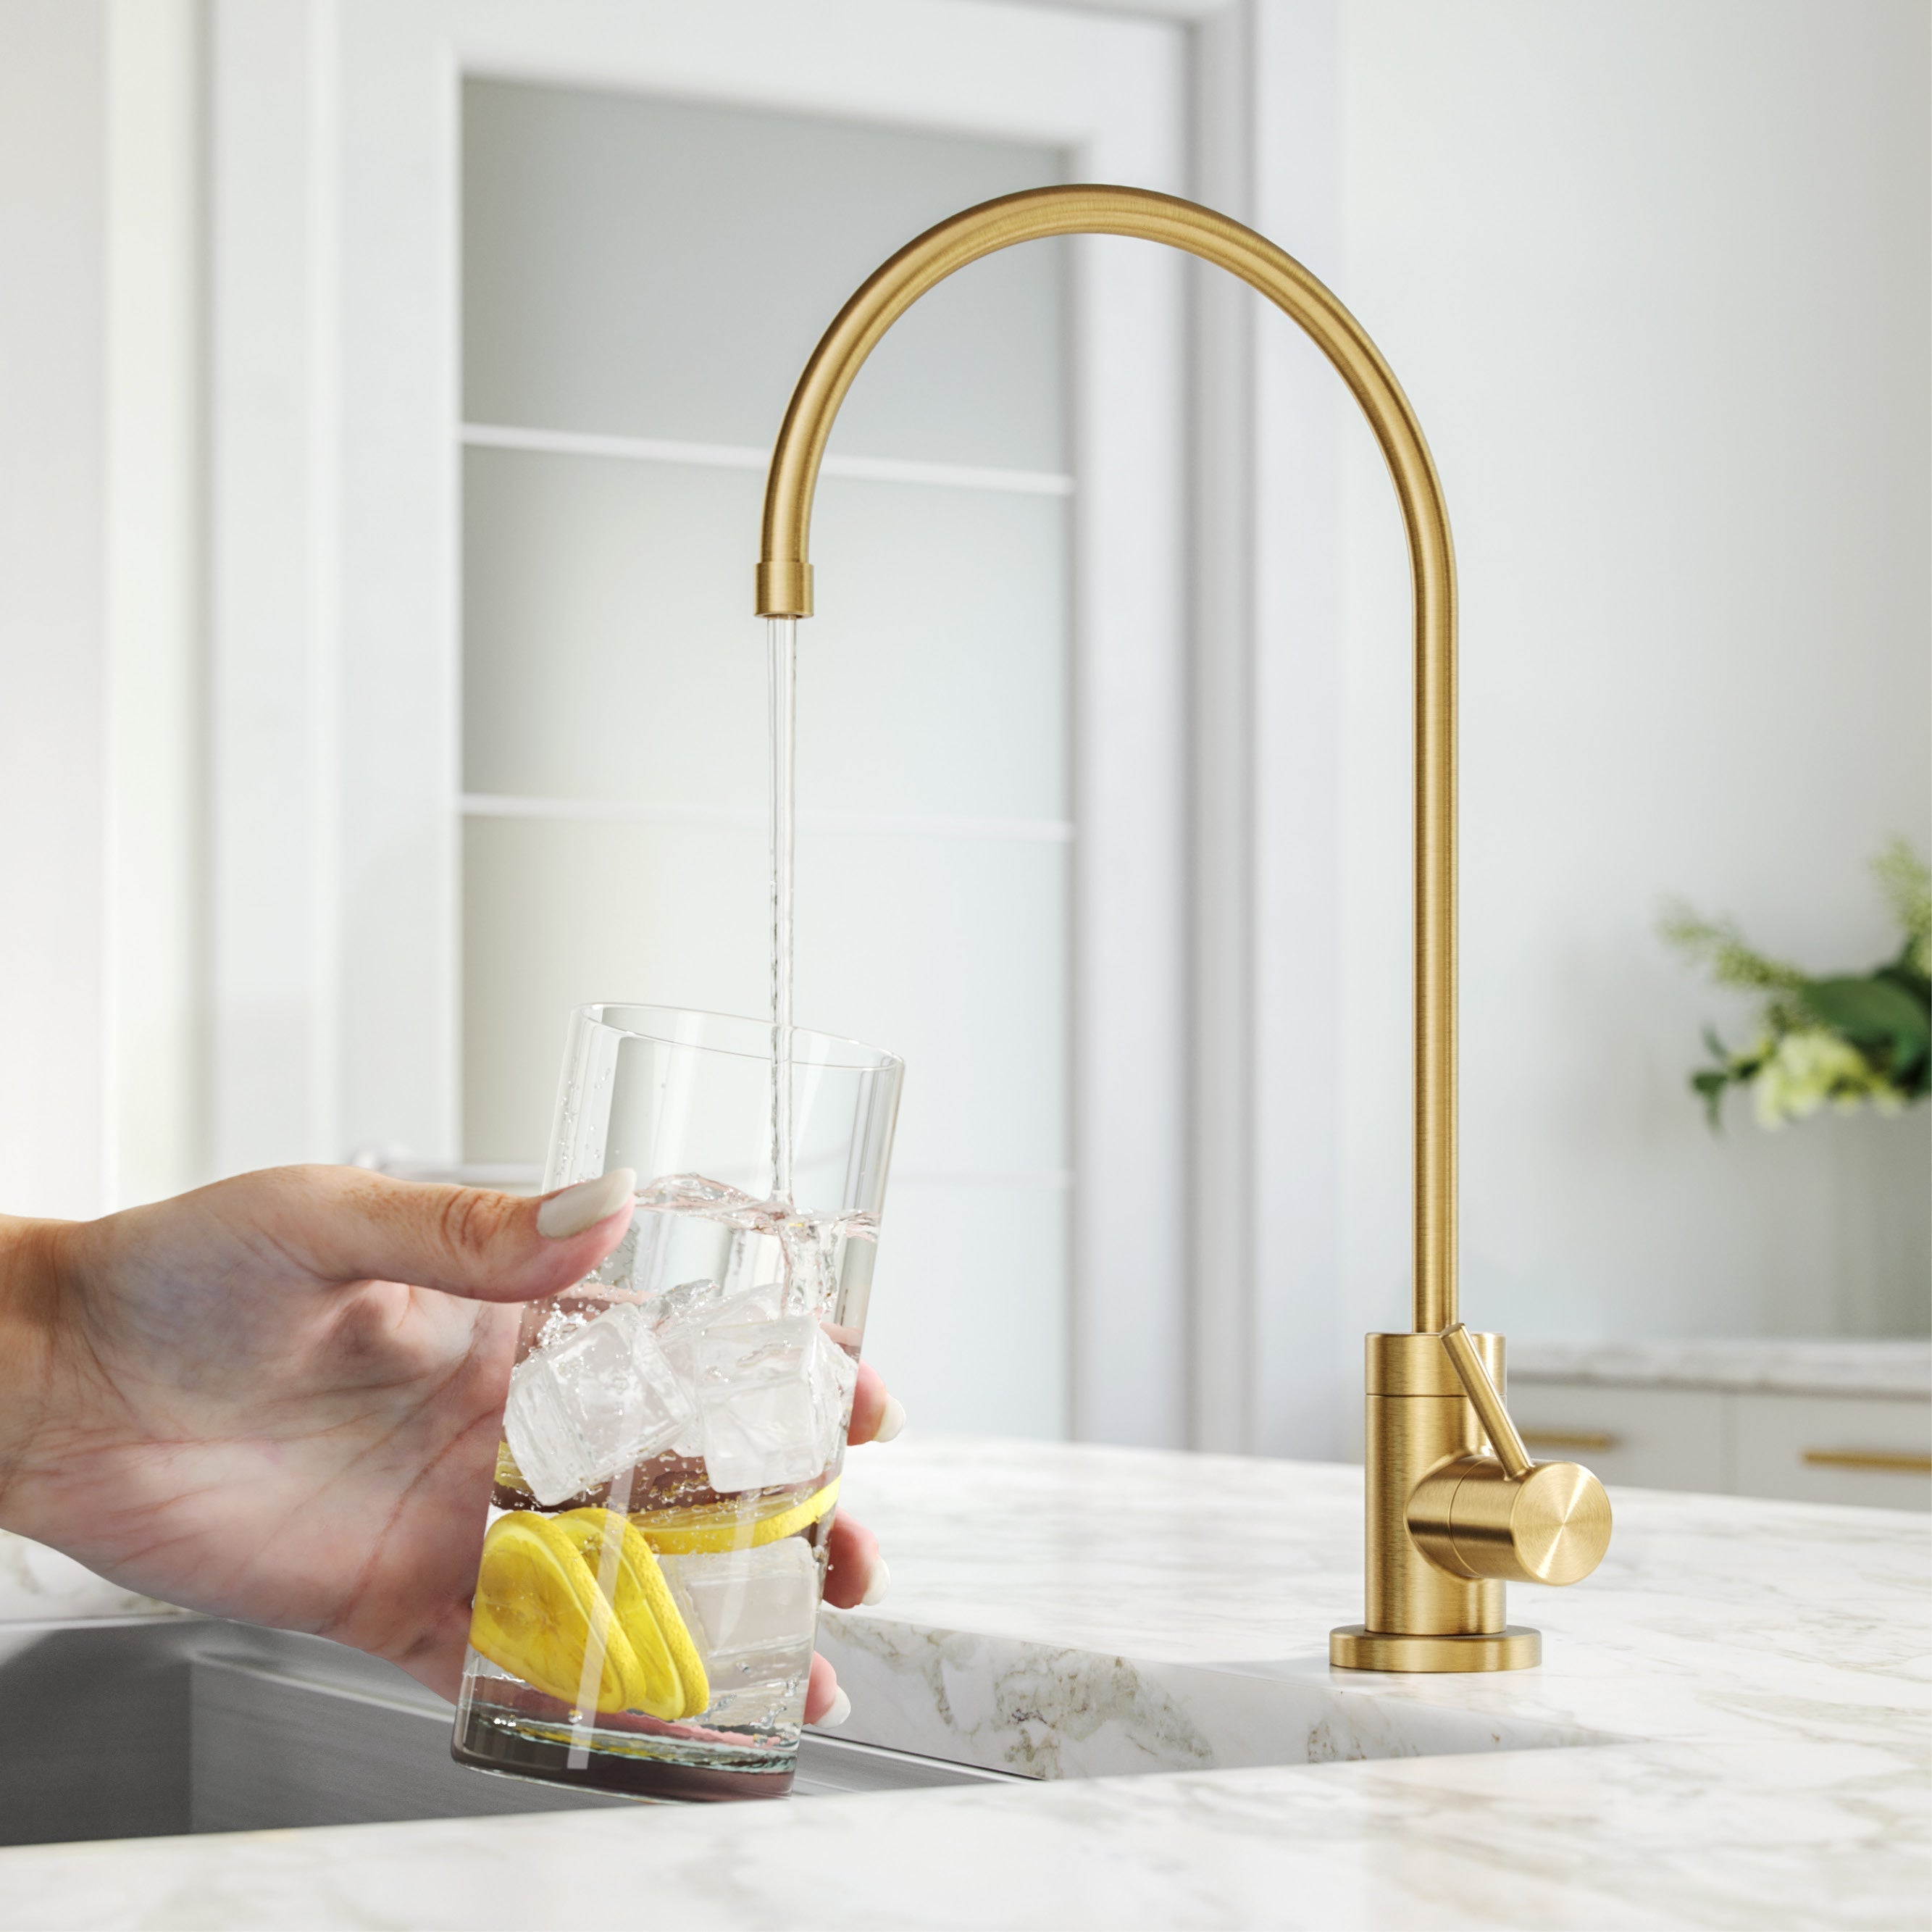 KRAUS Purita 2-Stage Under-Sink Filtration System with Single Handle Drinking Water Filter Faucet in Brushed Brass-FS-1000-FF-100BB